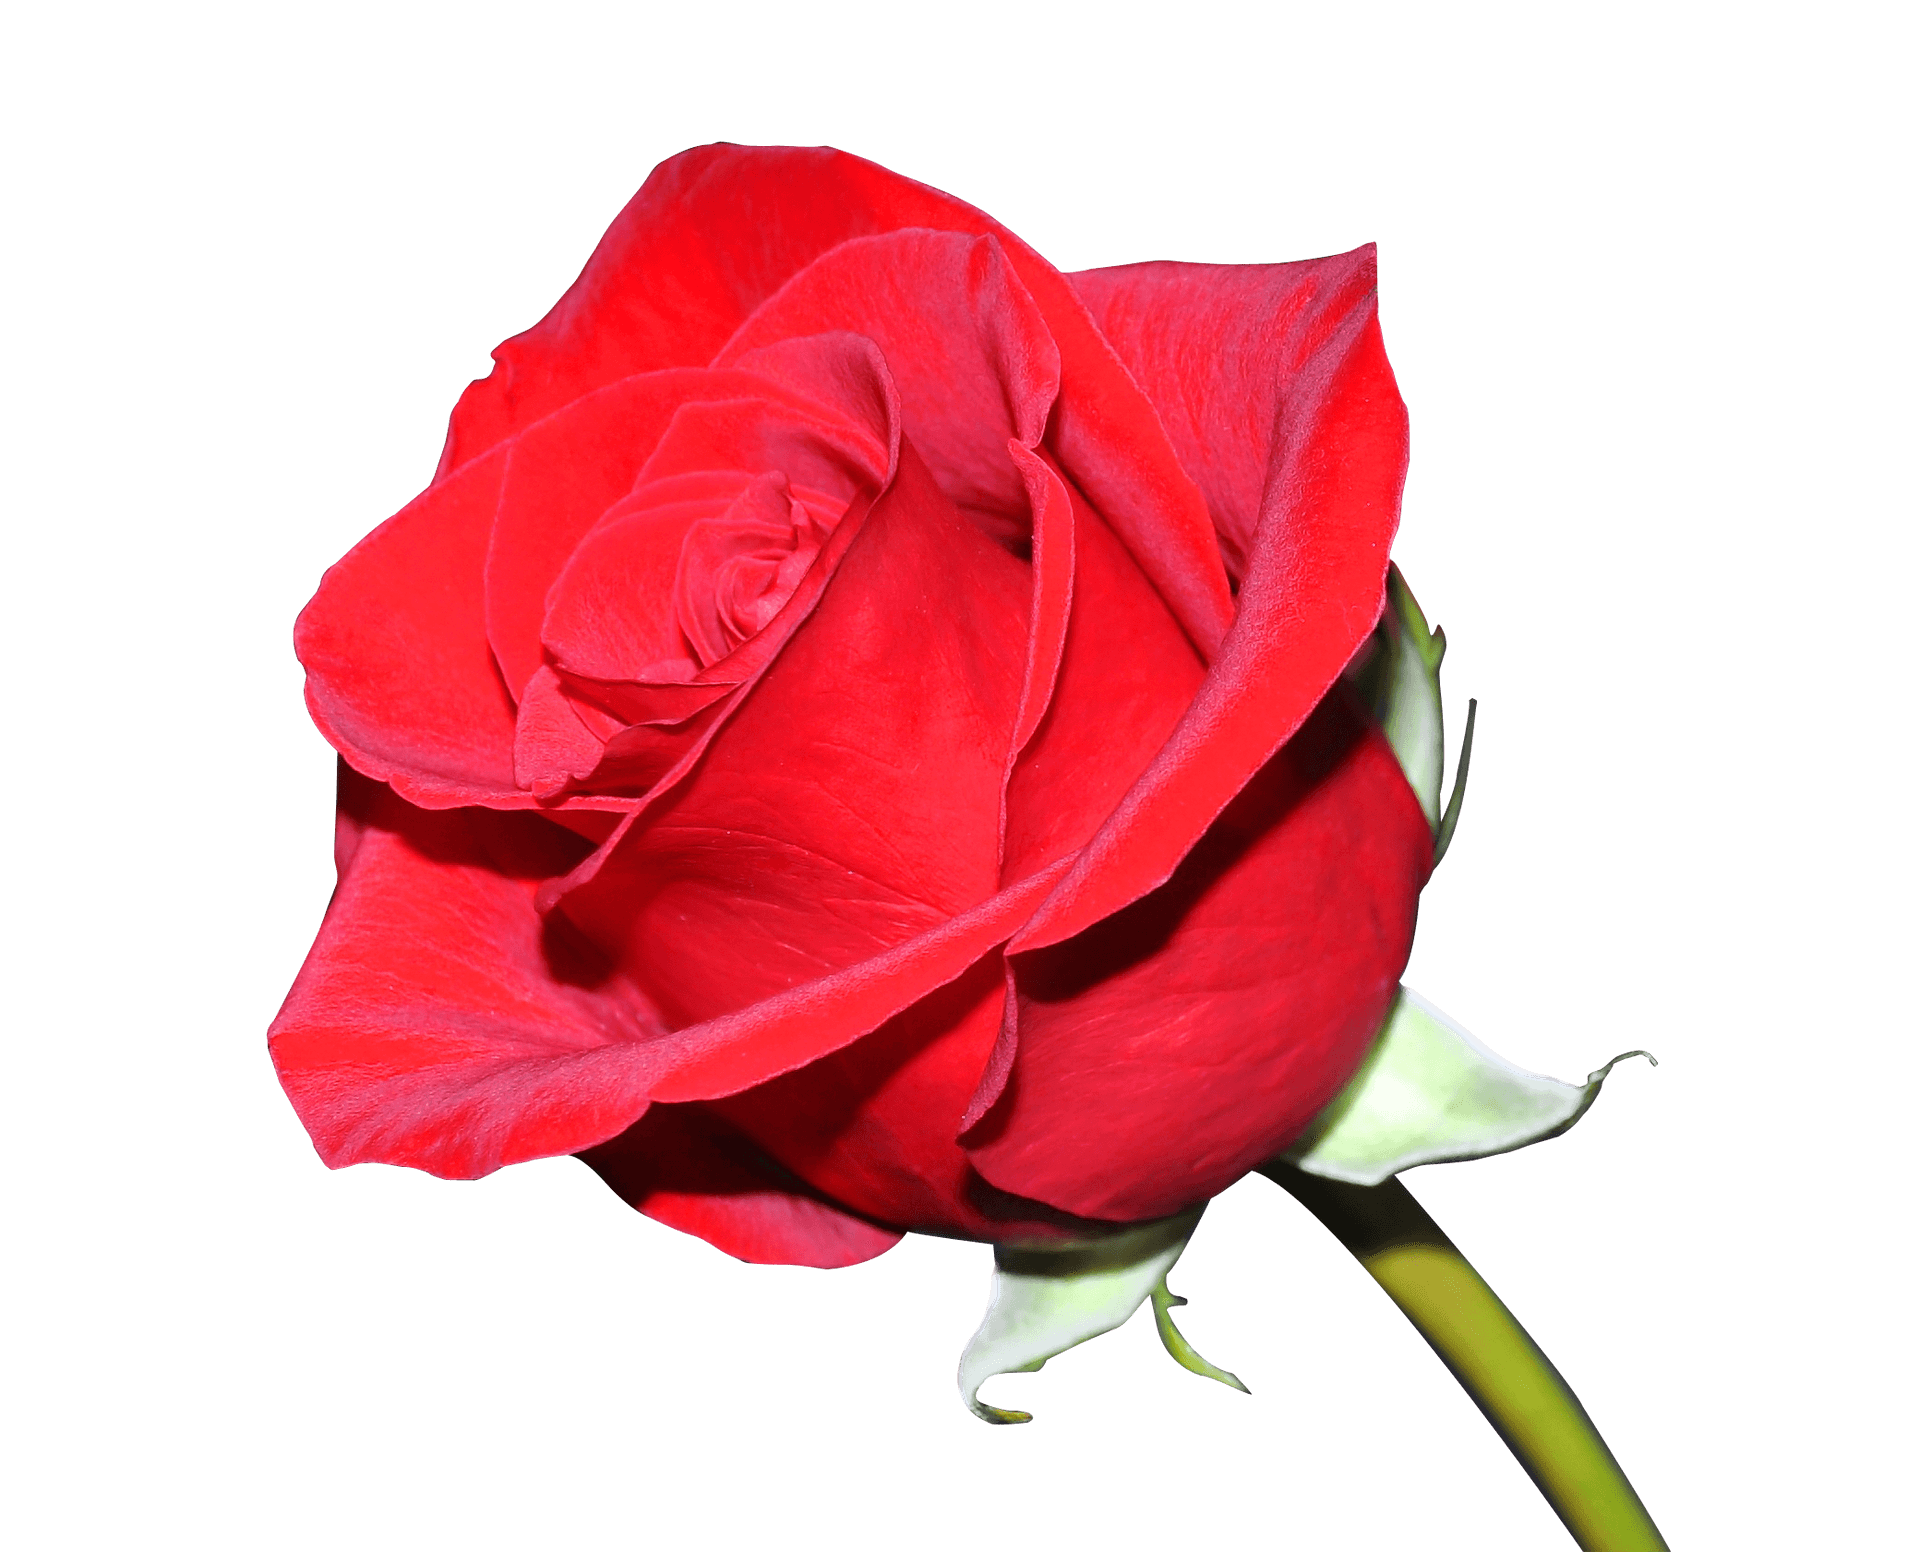 Vibrant Red Rose Isolated.png PNG